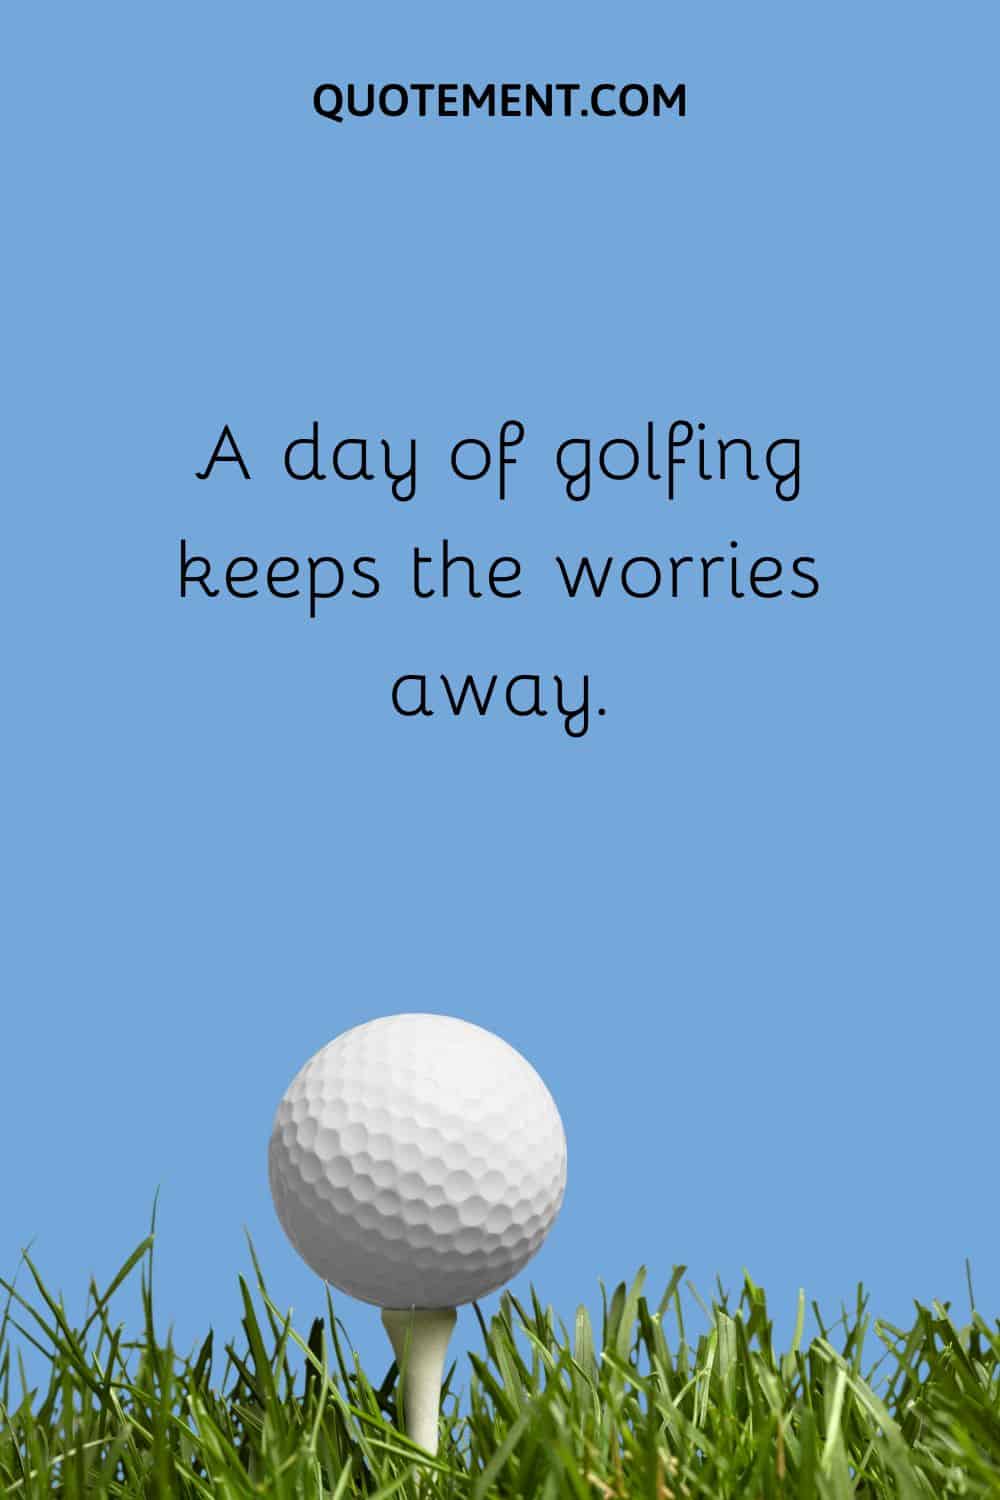 A day of golfing keeps the worries away.